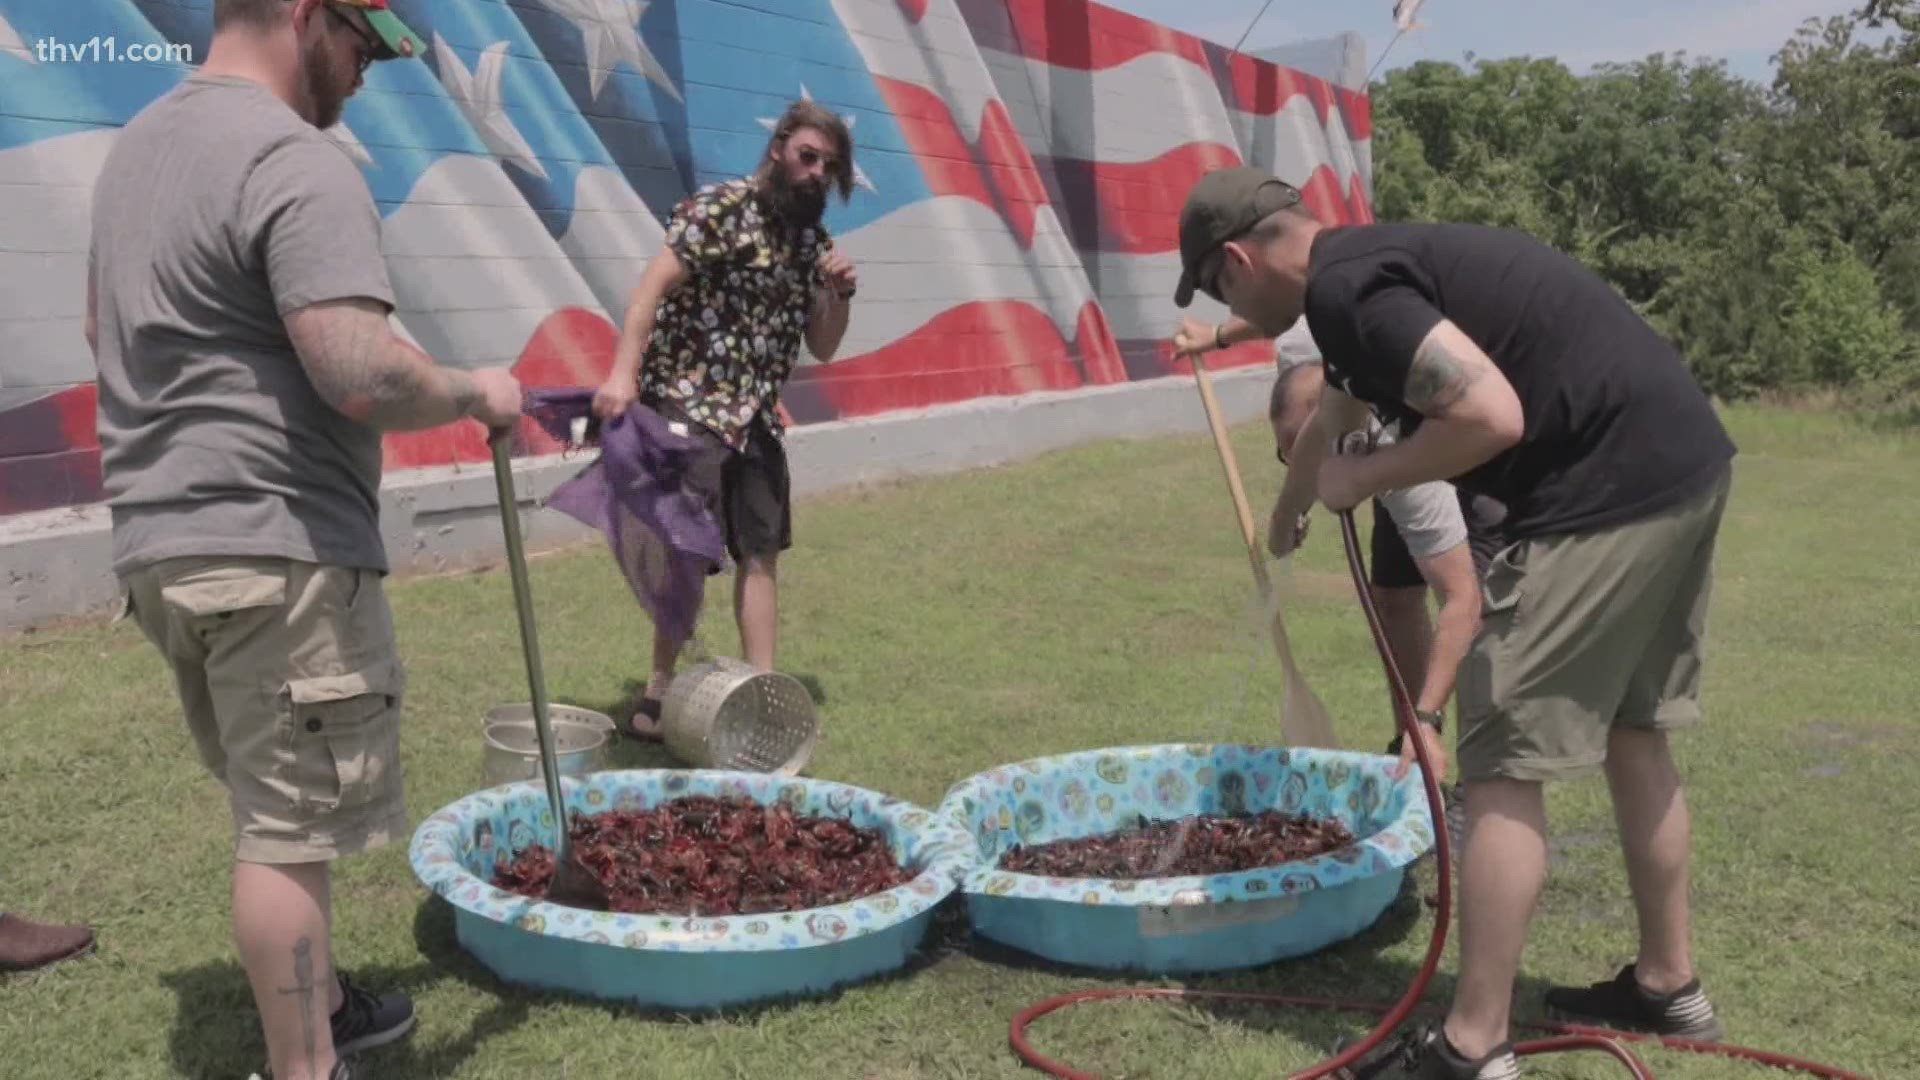 The Little Rock VFW had a crawfish boil on Saturday!